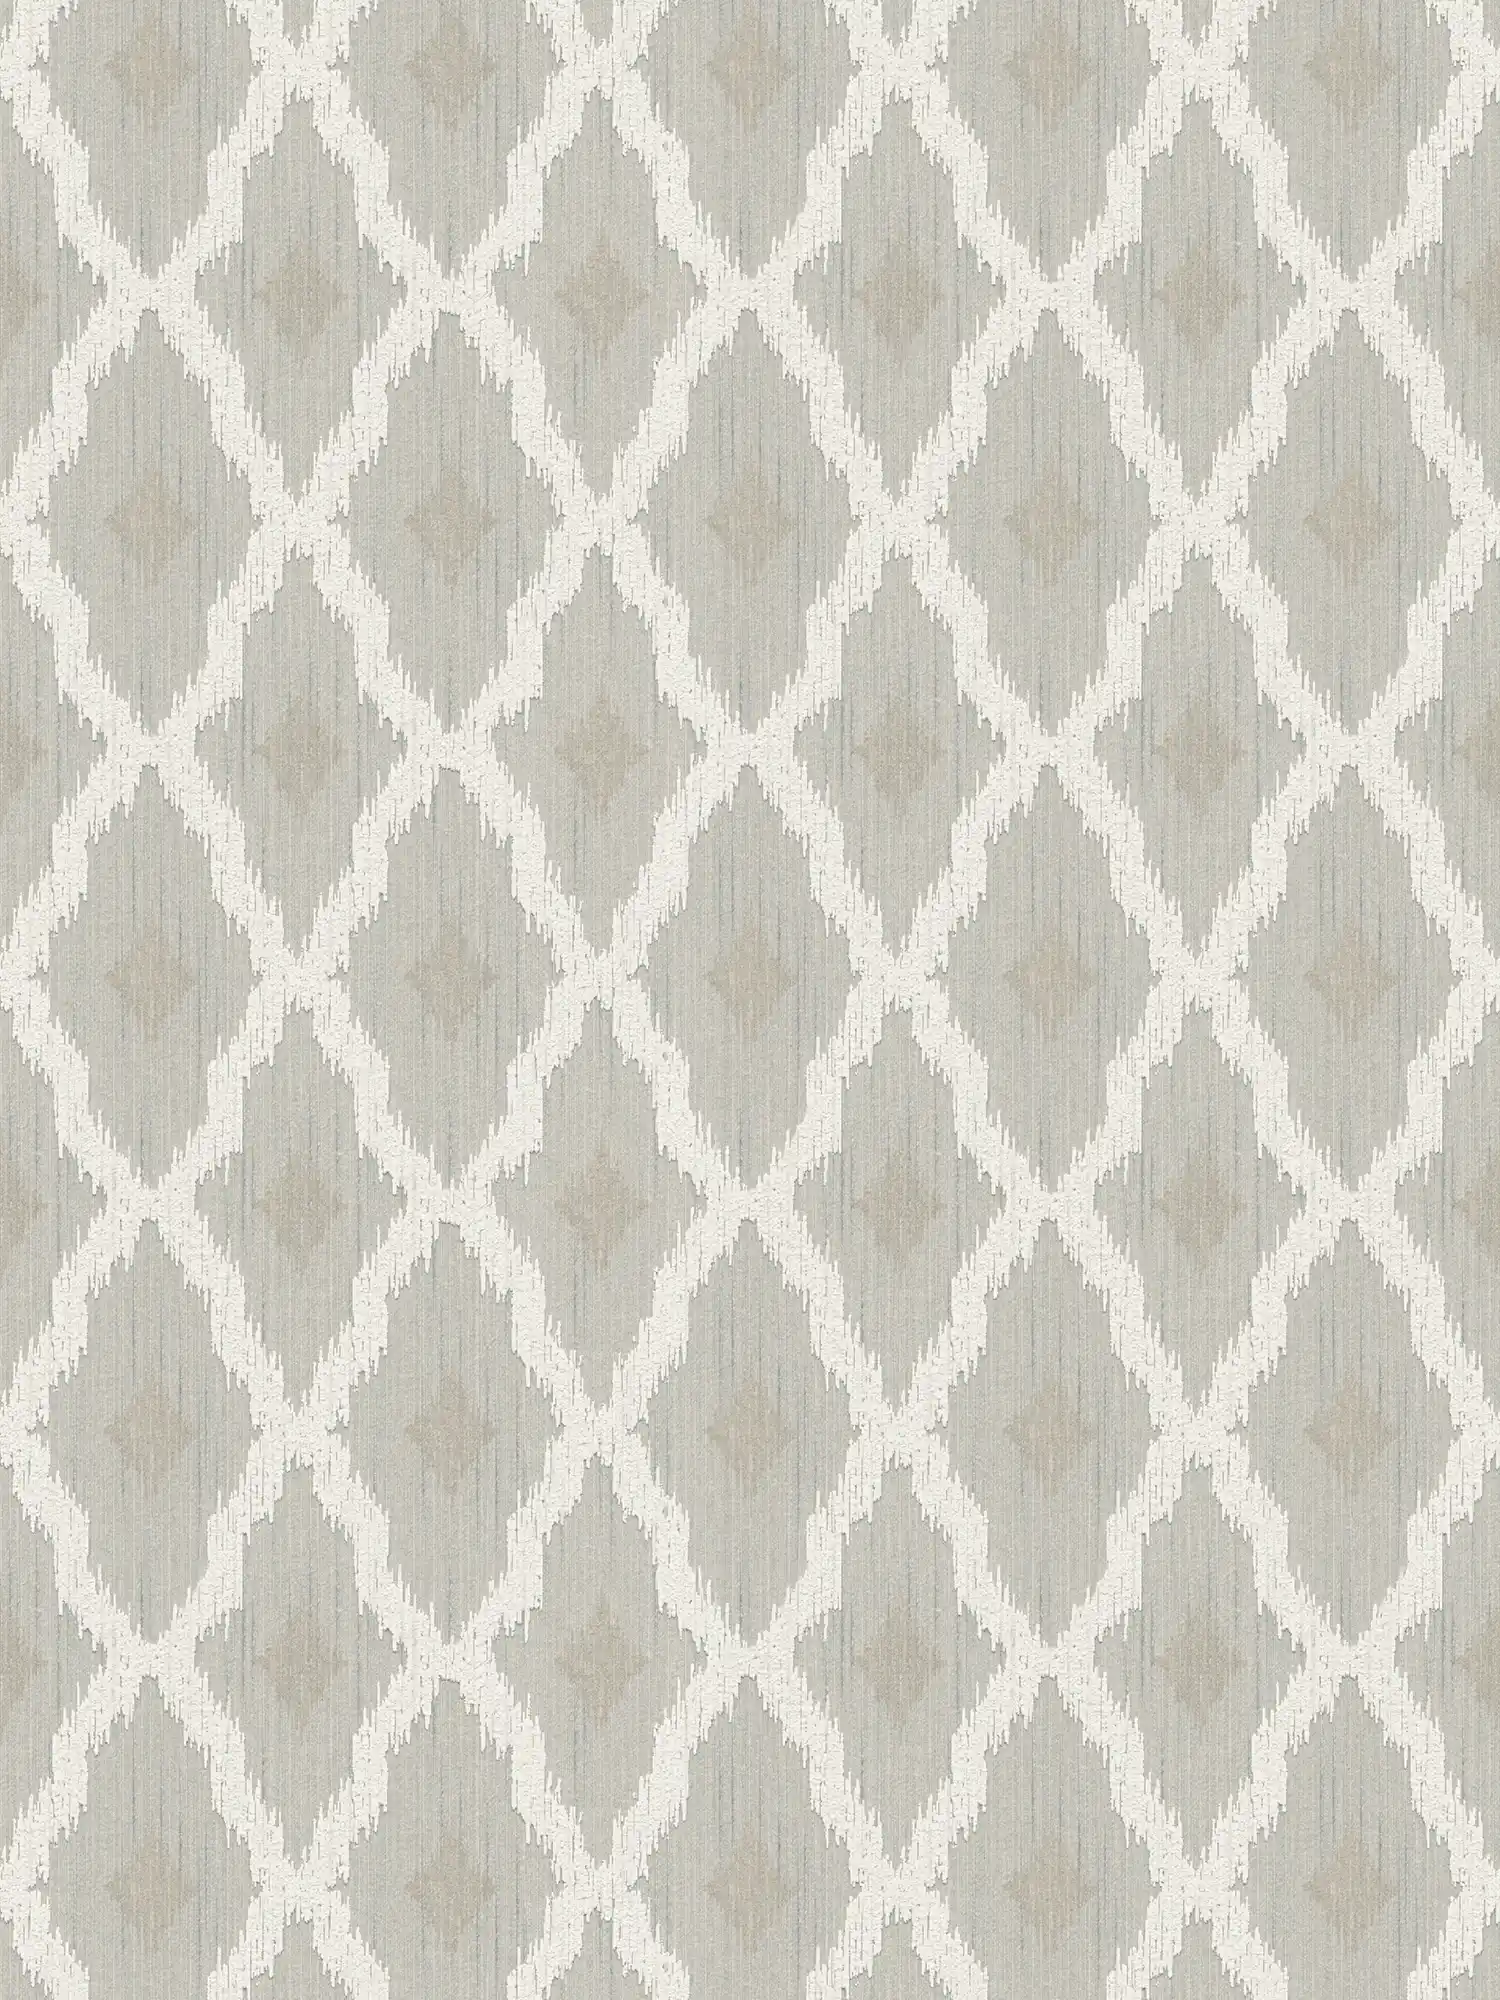 Grey non-woven wallpaper with curved diamond pattern
